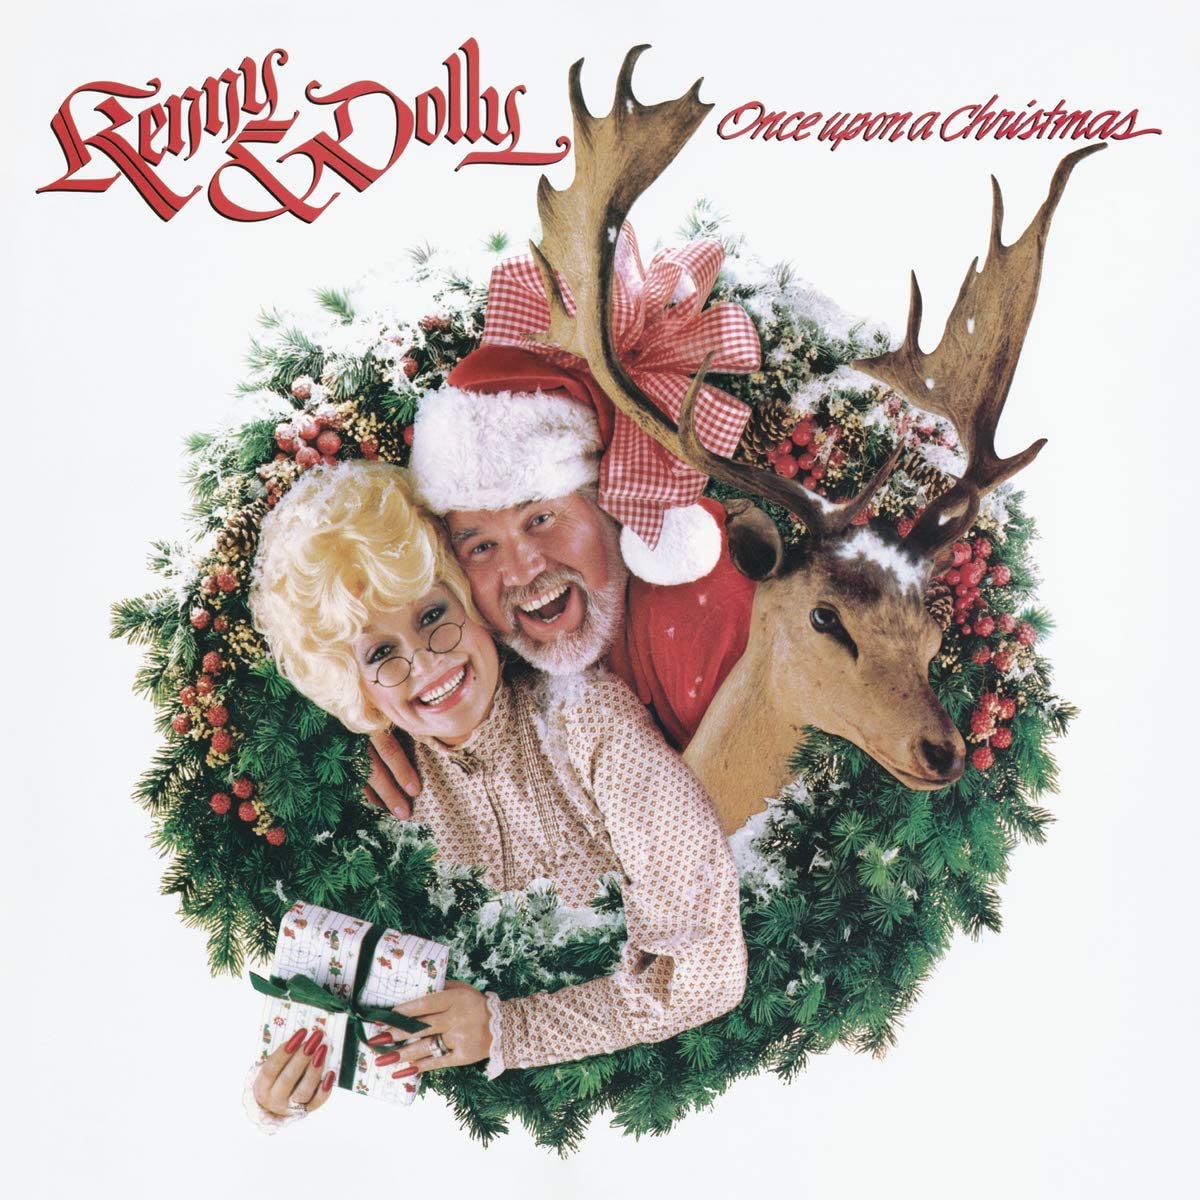 Dolly Parton Kenny Rogers Once Upon a Christmas - Ireland Vinyl